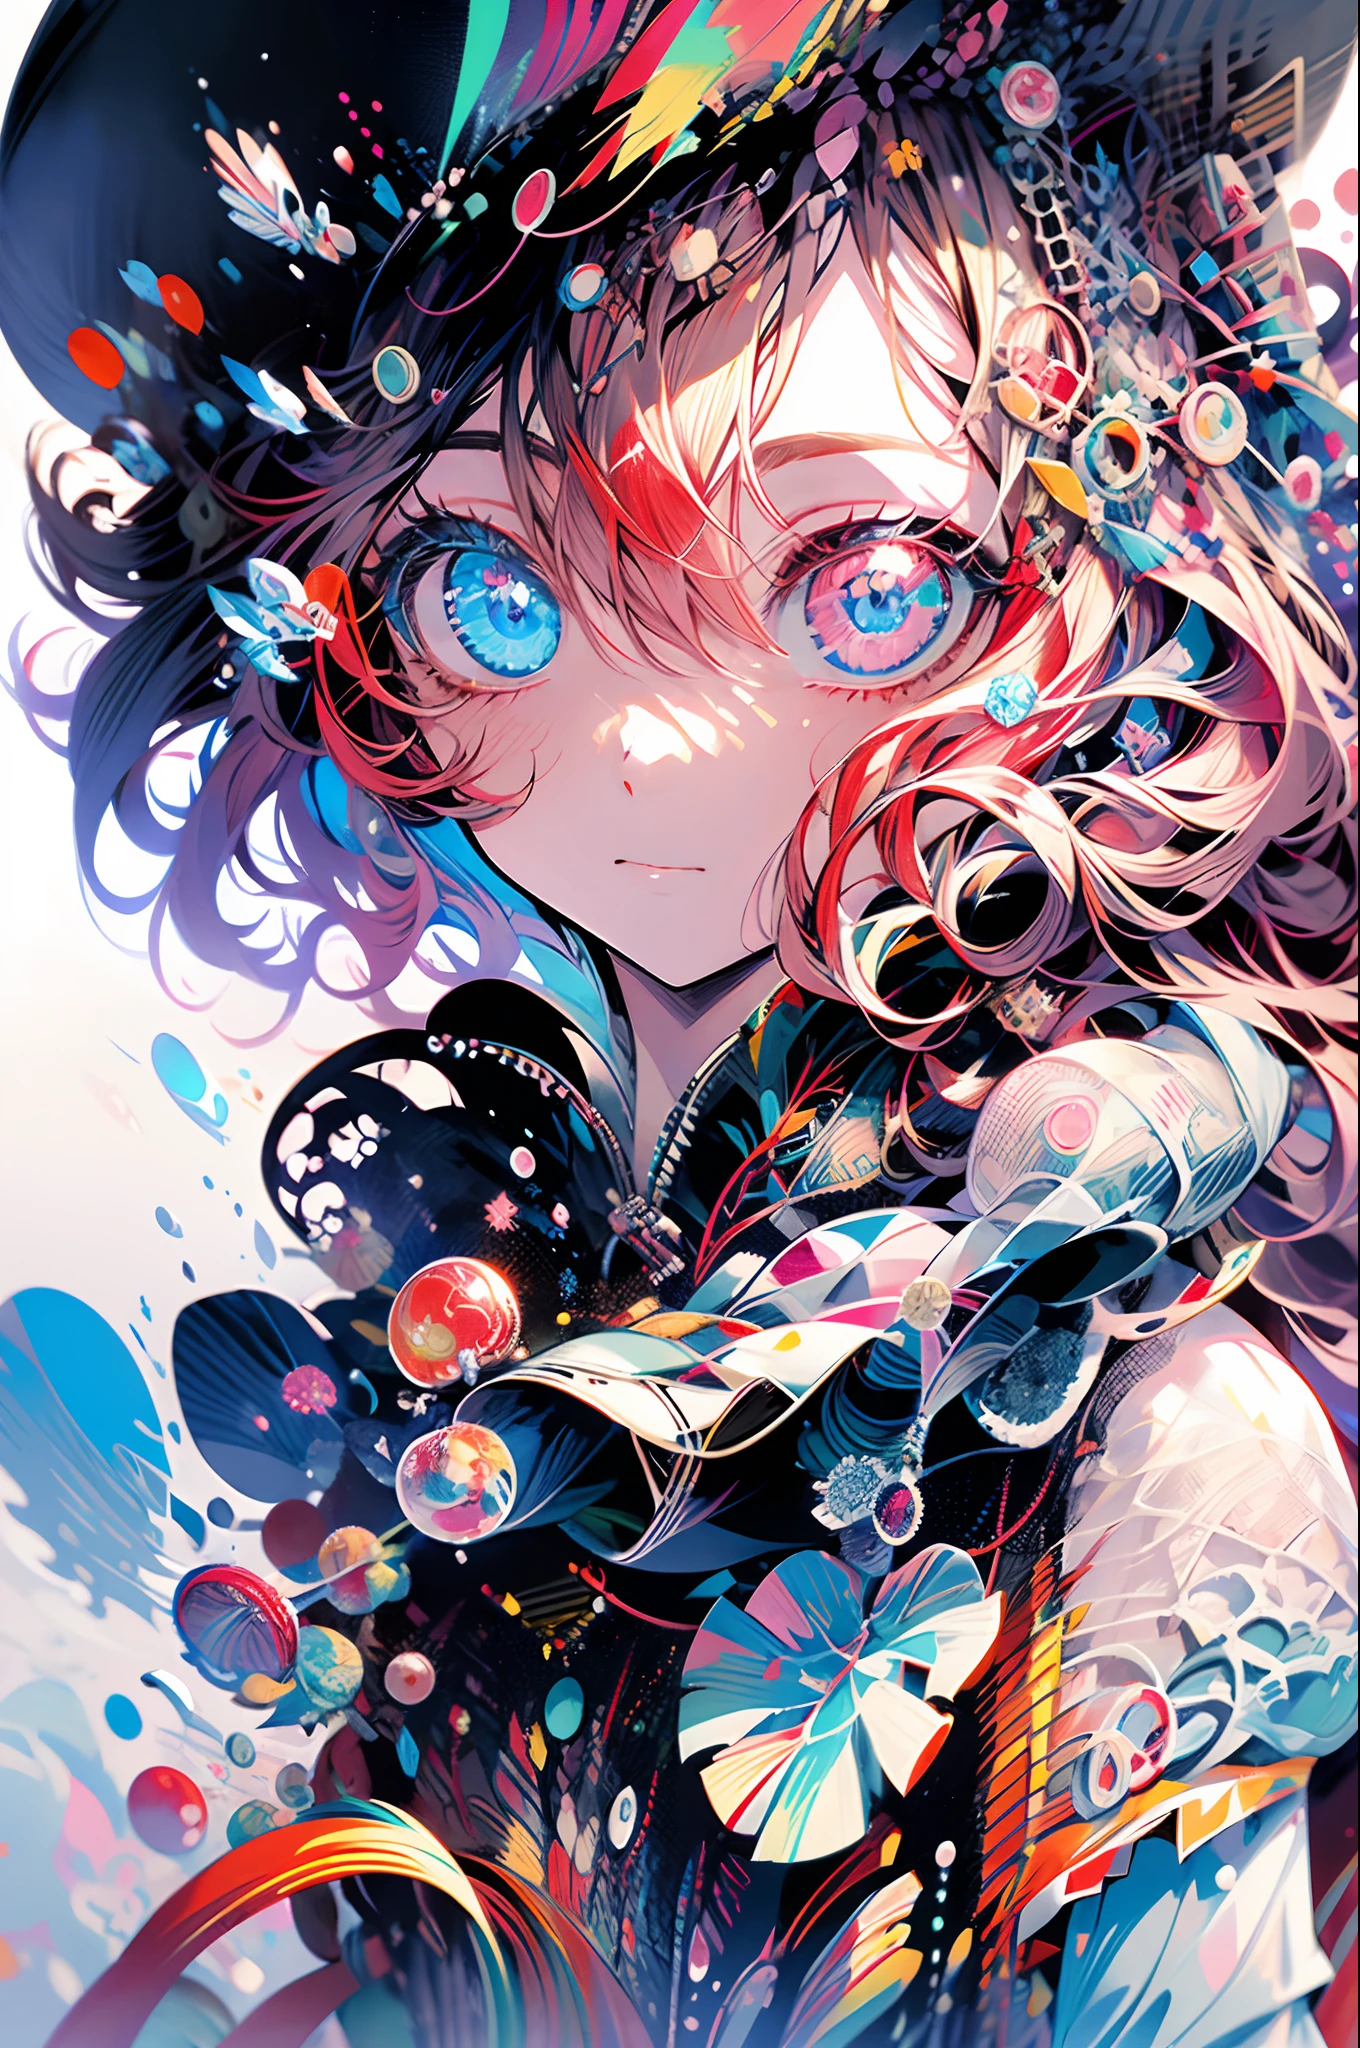 girl with,Solo, Heterochromia,red and blue eyes,long curly hair,Two bangs,pale skin, Looking at the viewer,Closed mouth, lightsmile, Beautiful, extremely detailed eye, Close Up Shot,Upper body, Wearing a jacket, Absolutely amazing art, Extremely detailed, highest quality digital art,